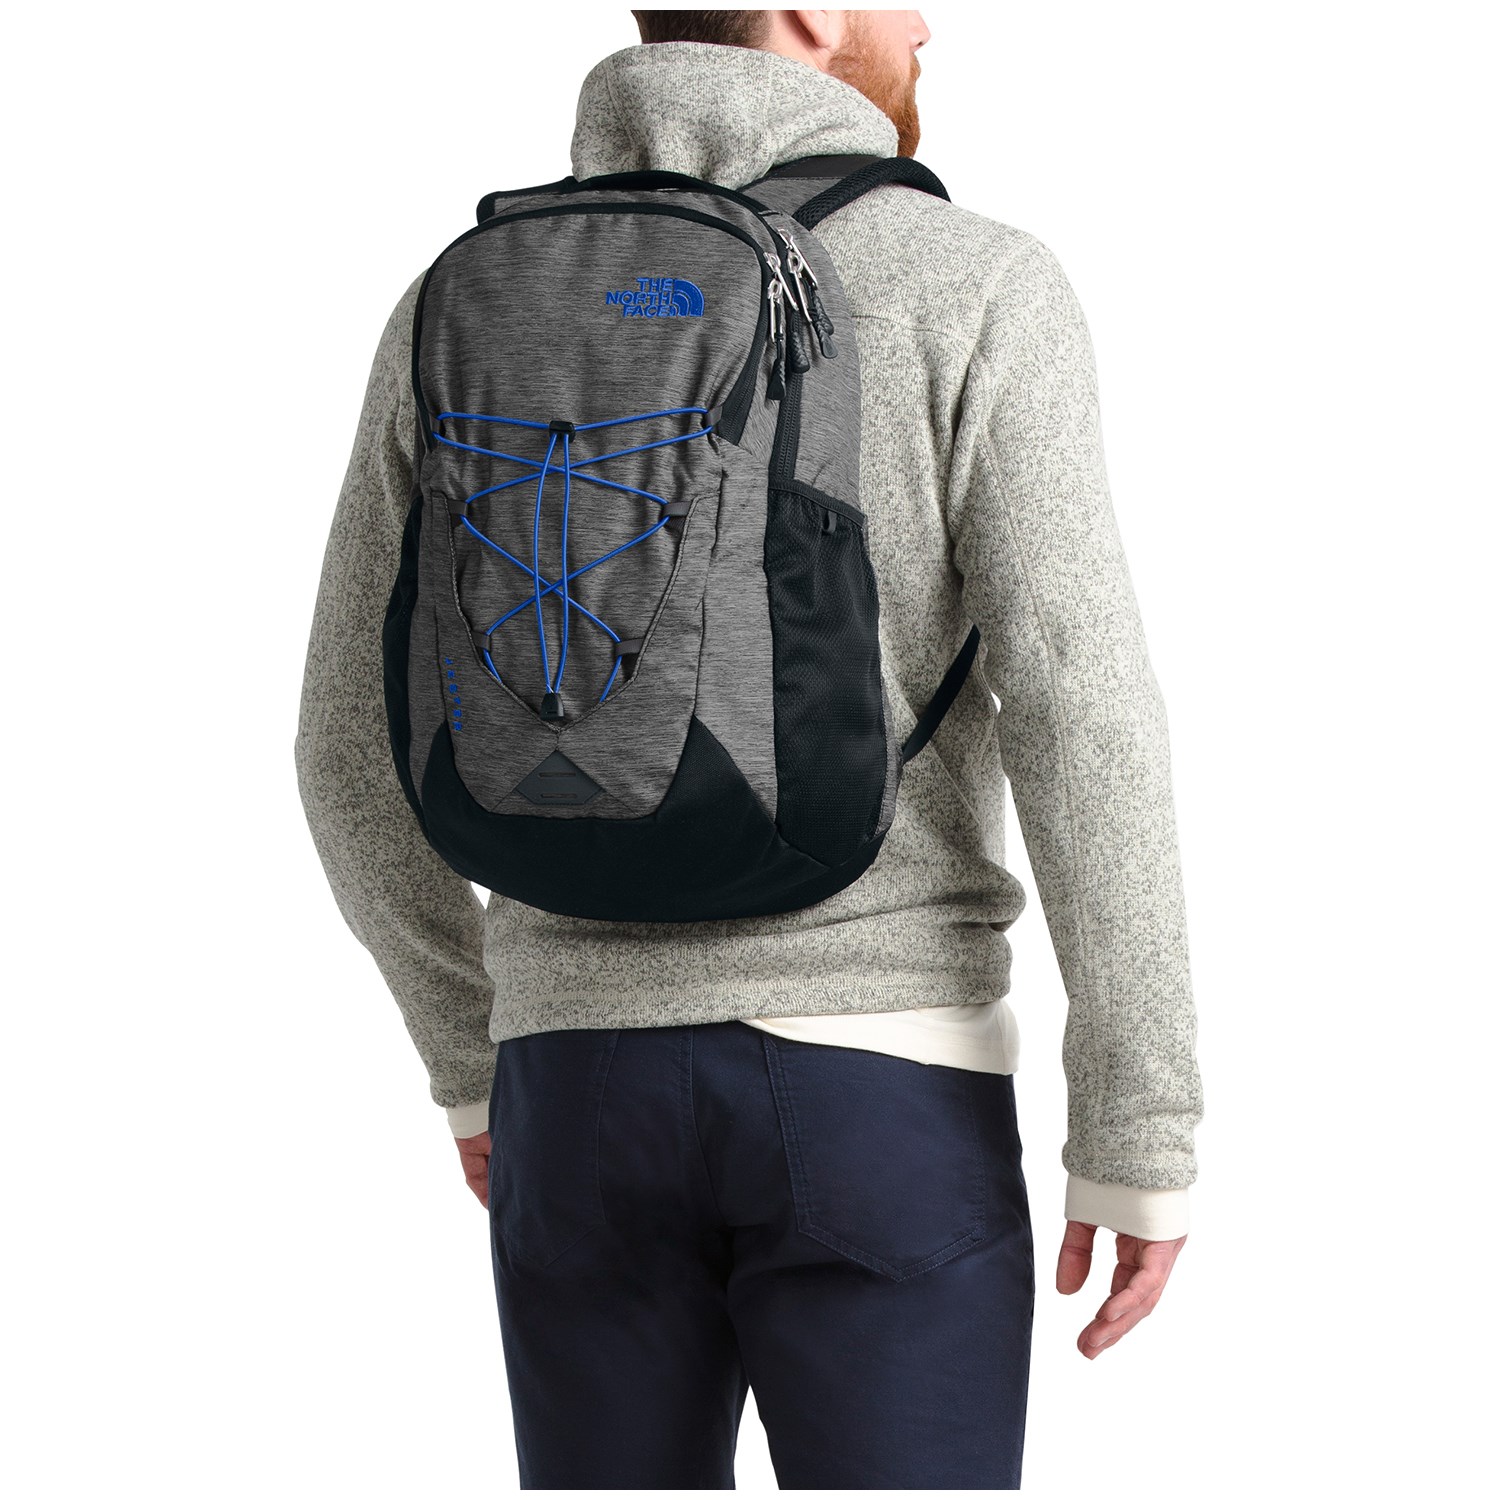 the jester backpack